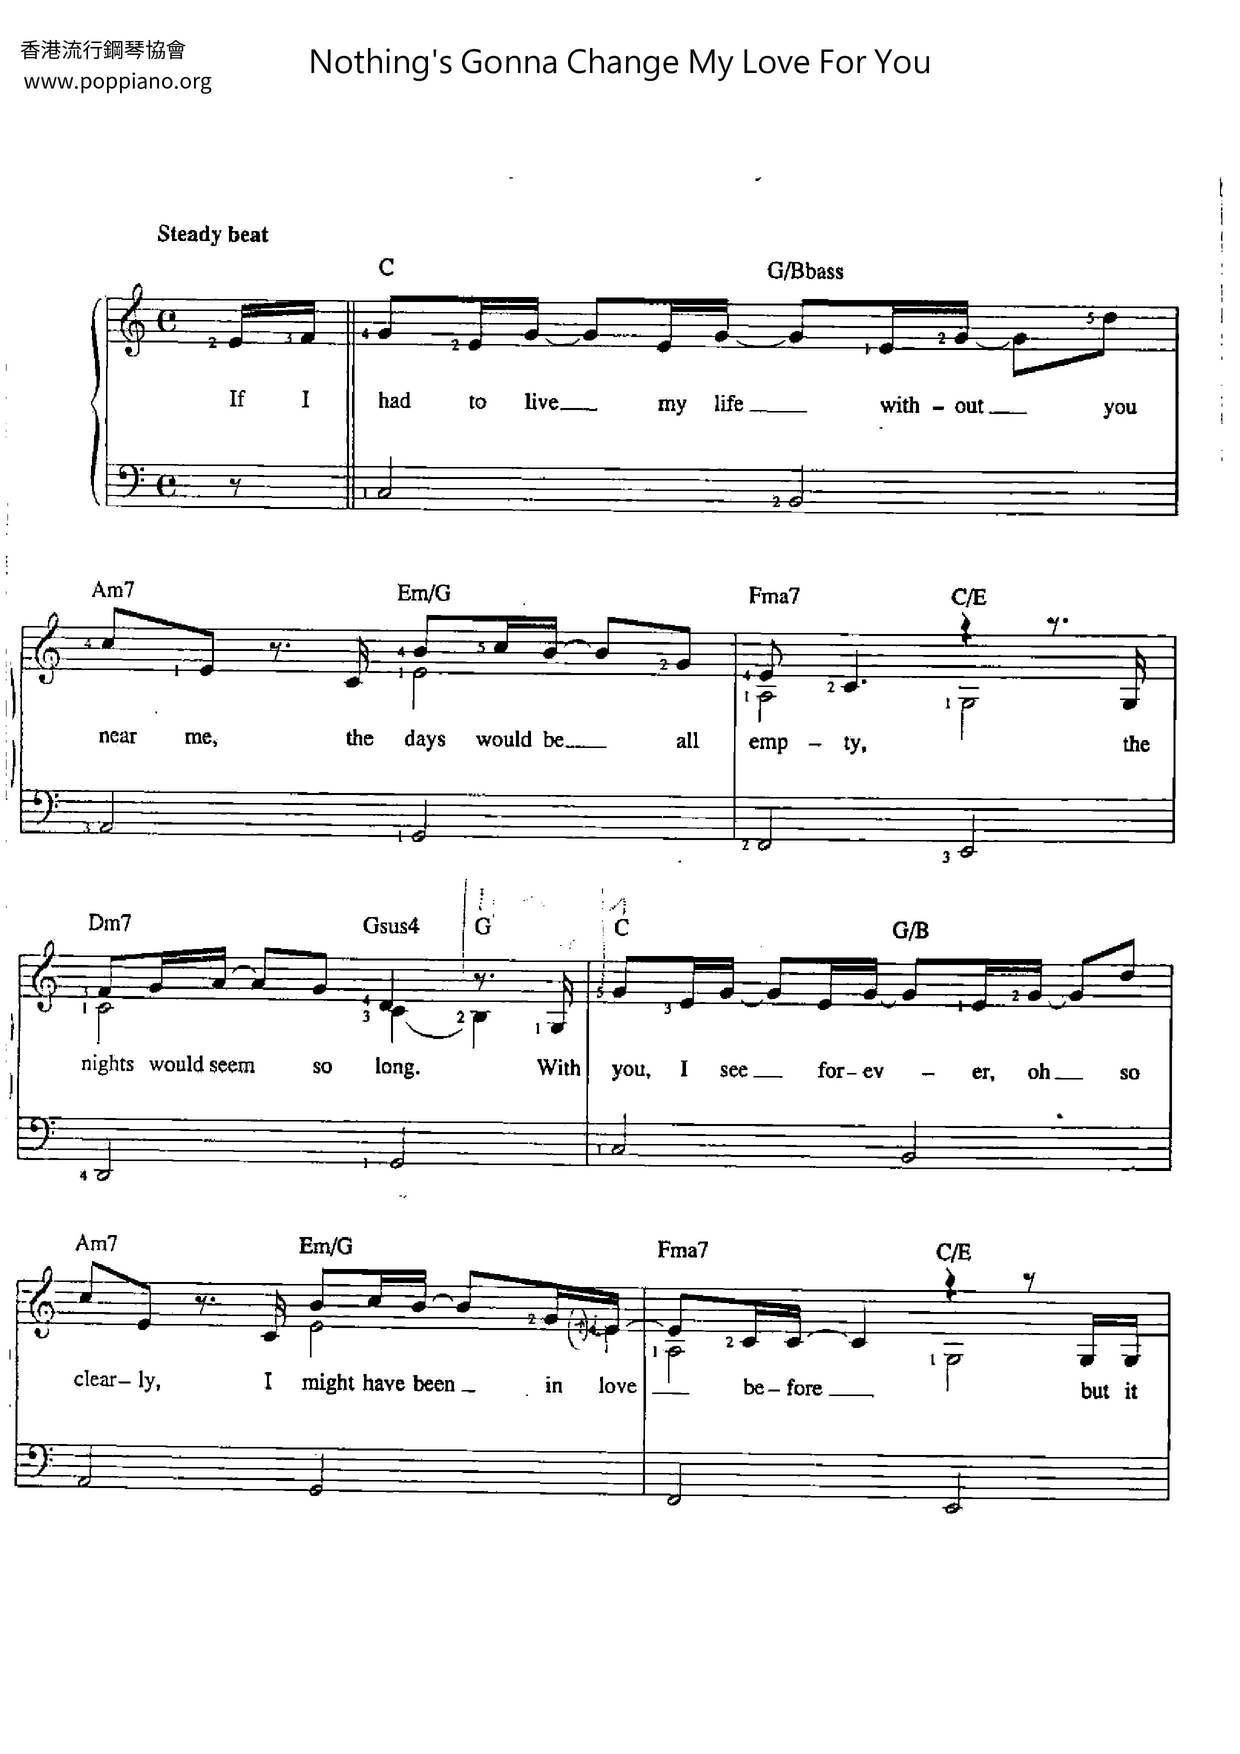 George Benson Nothing S Gonna Change My Love For You Sheet Music Pdf Free Score Download